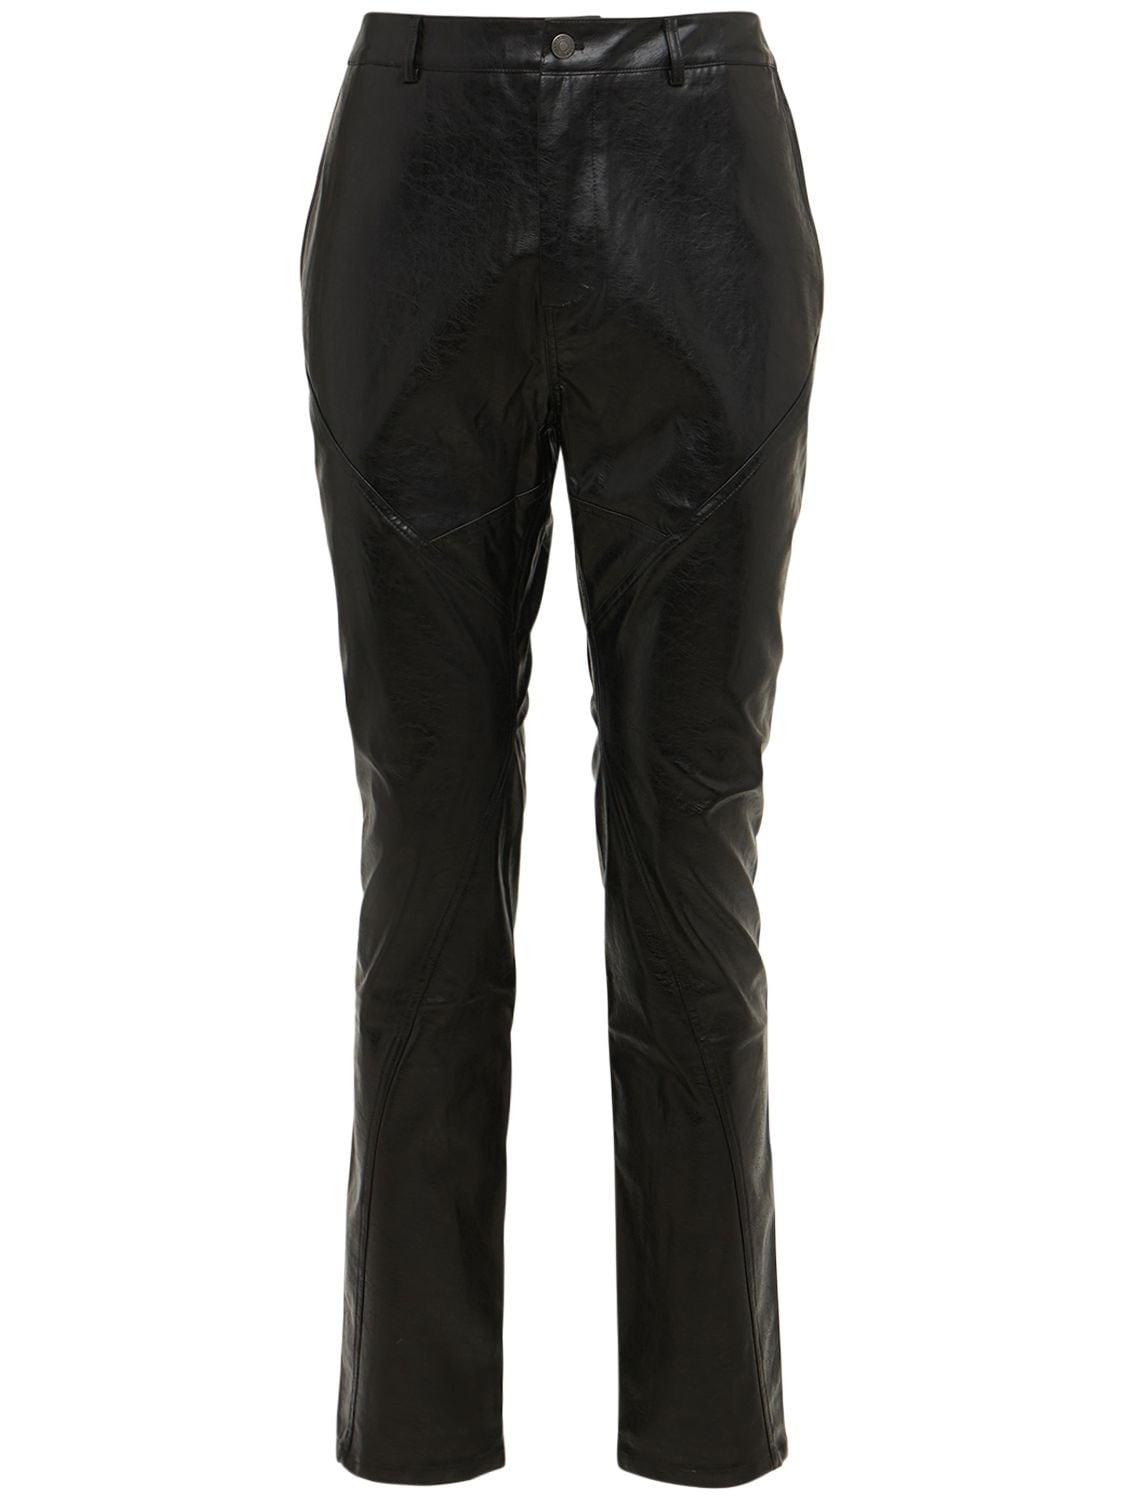 Jaded London Men's Black Paneled Cracked Faux Leather Jeans